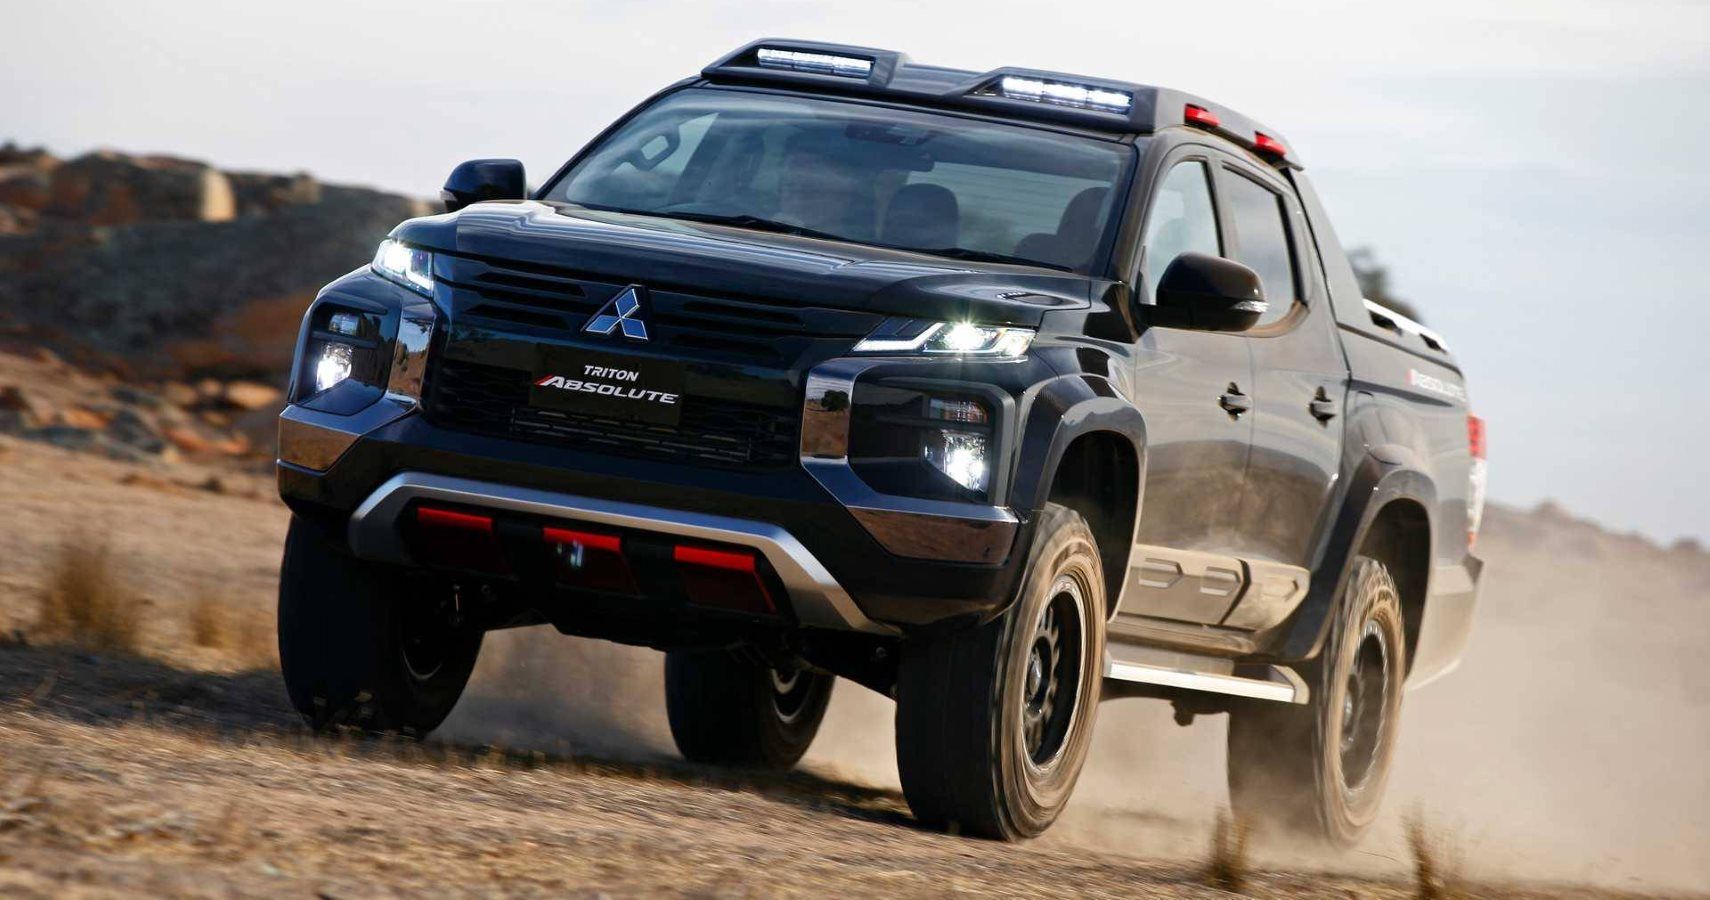 Mitsubishi Triton Absolute Is The Extreme Off-Roader That Will Eat Your Puny Ranger For Breakfast